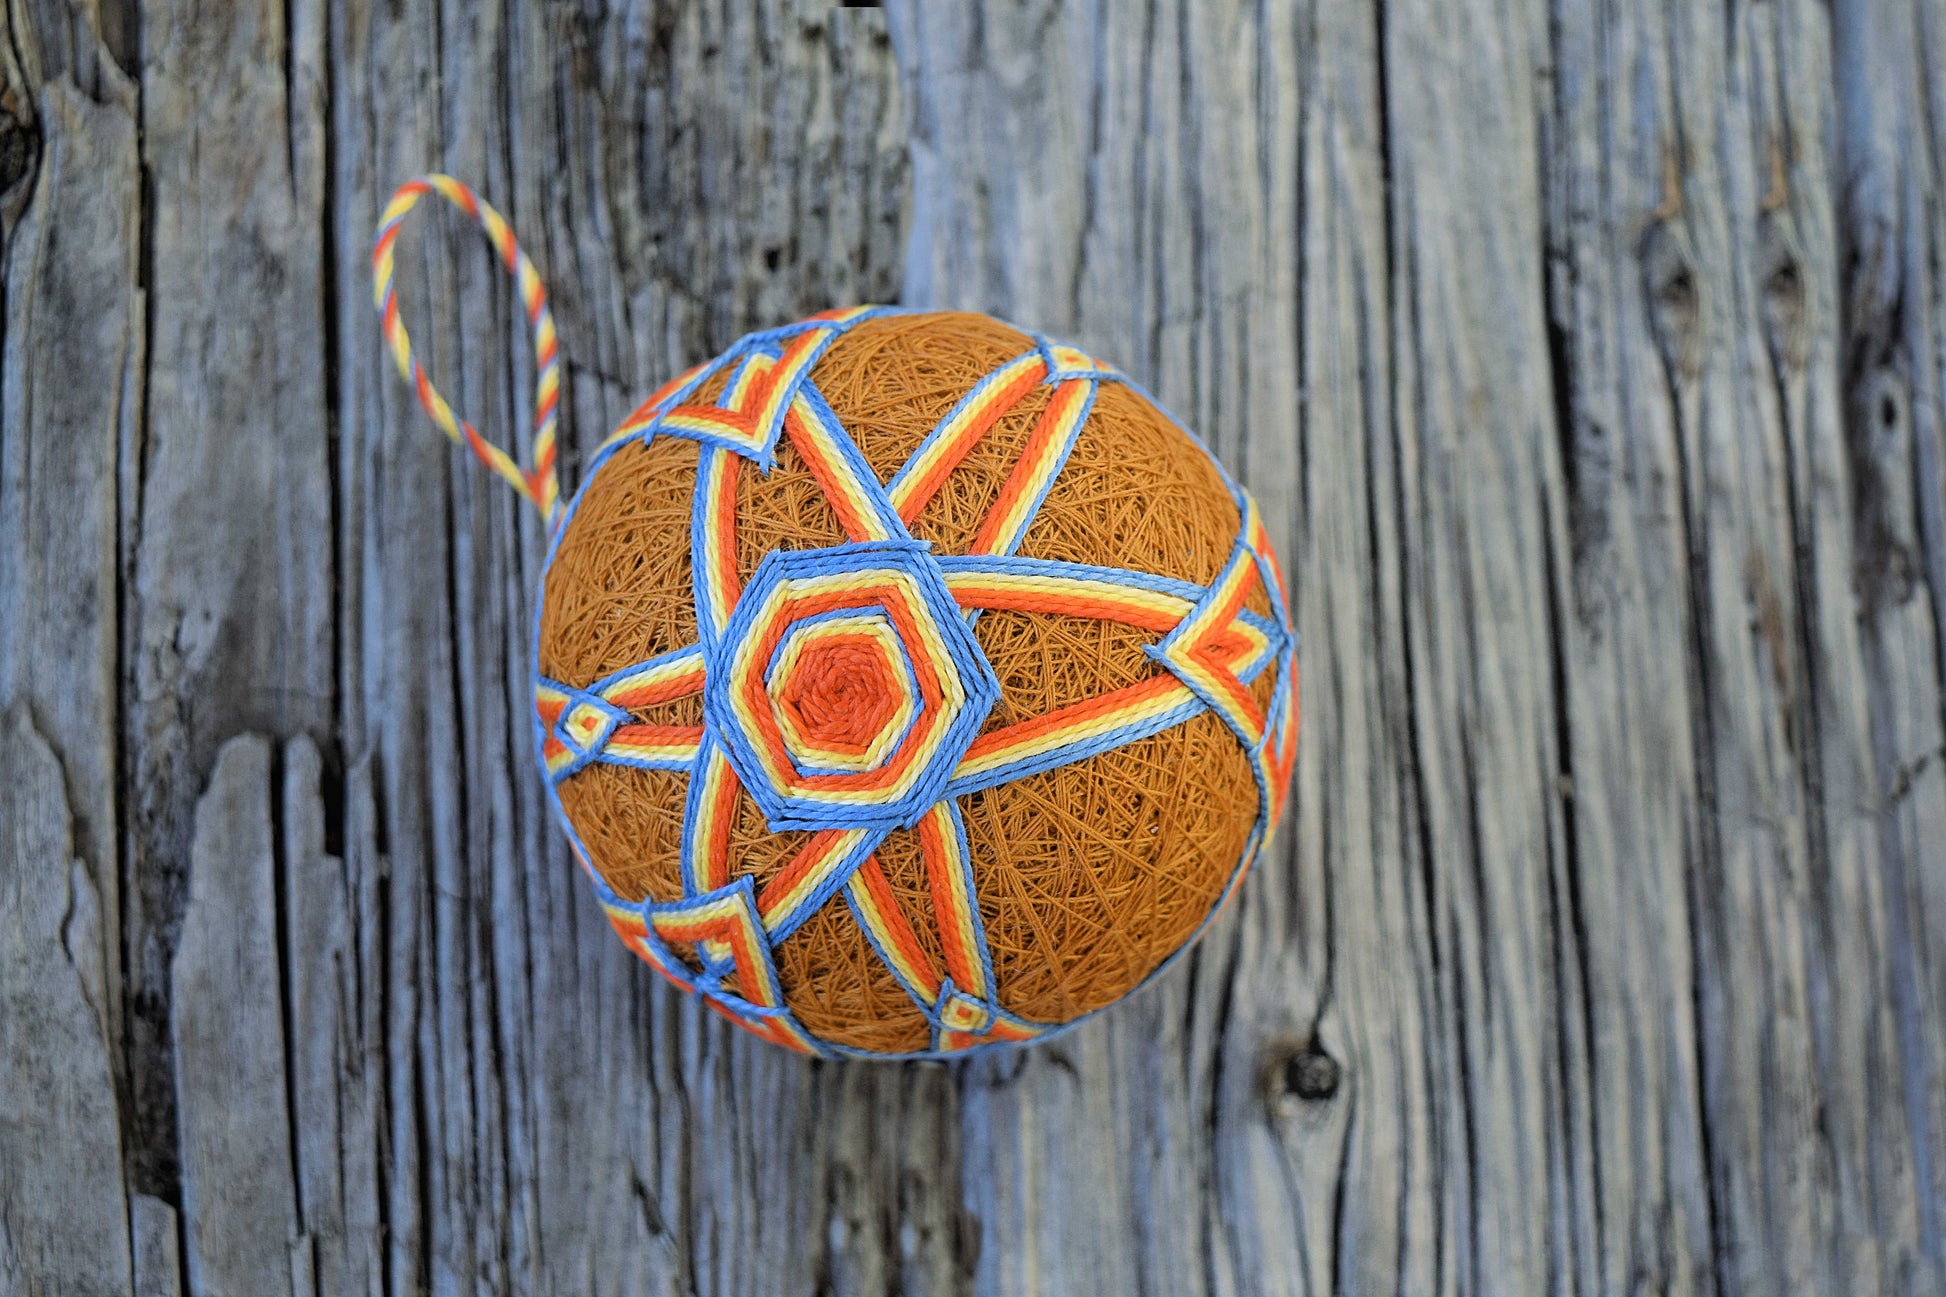 Temari ball with orange and blue hexagon pattern on gold base